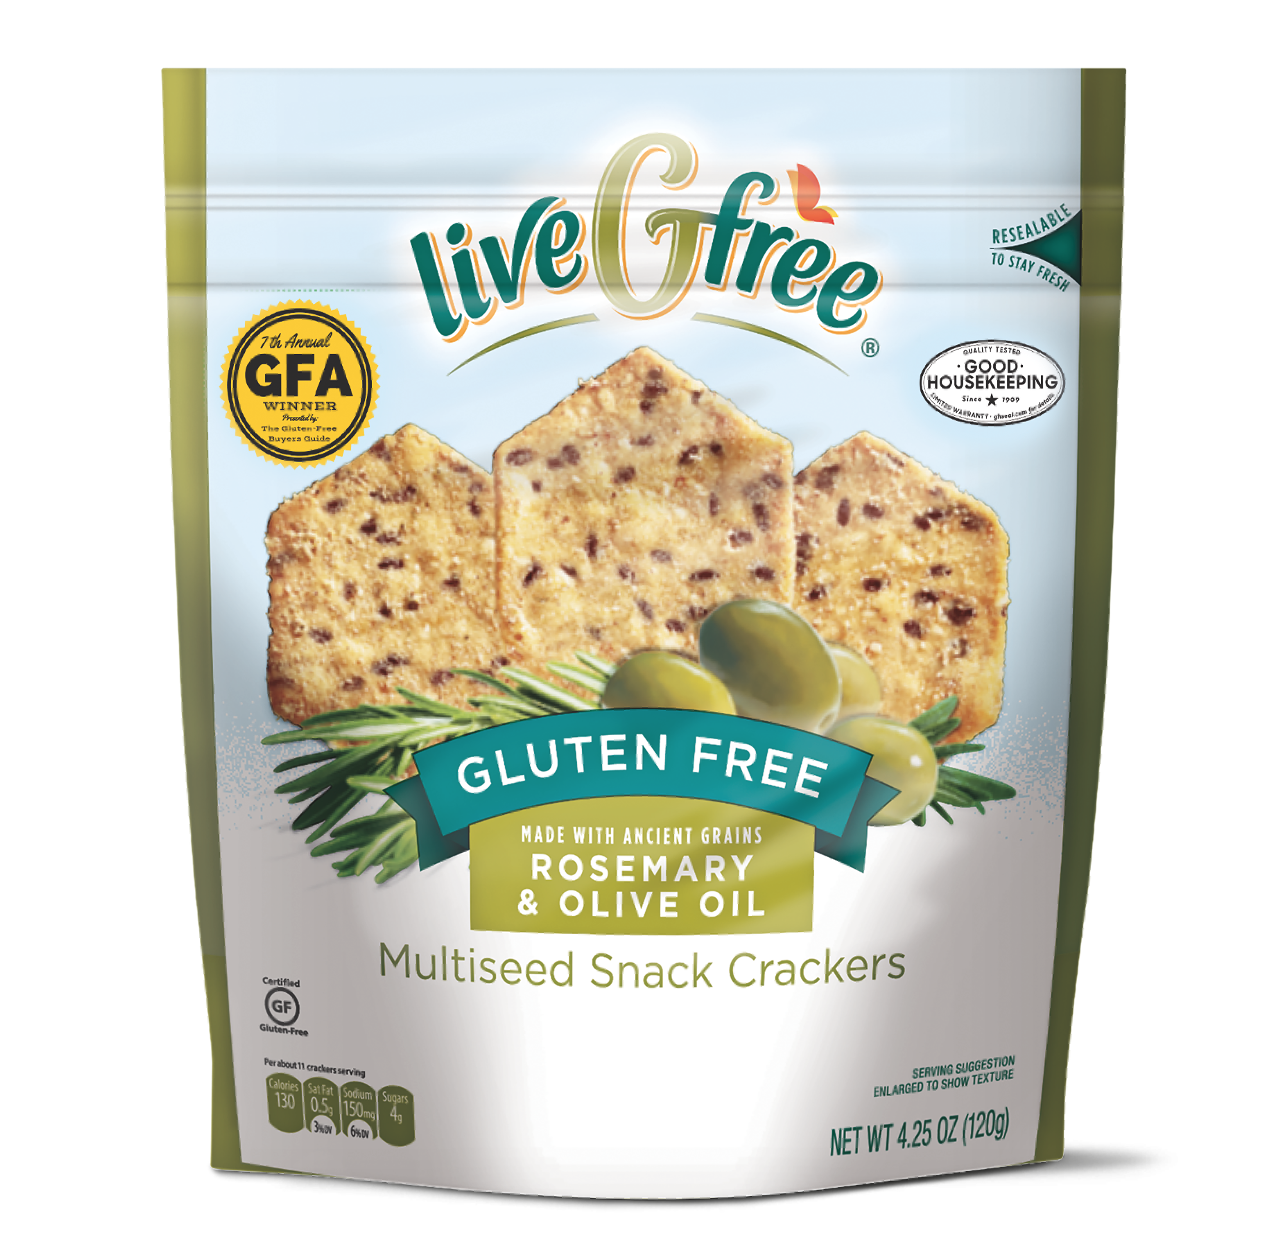 liveGfree Rosemary & Olive Oil Multiseed Snack Crackers